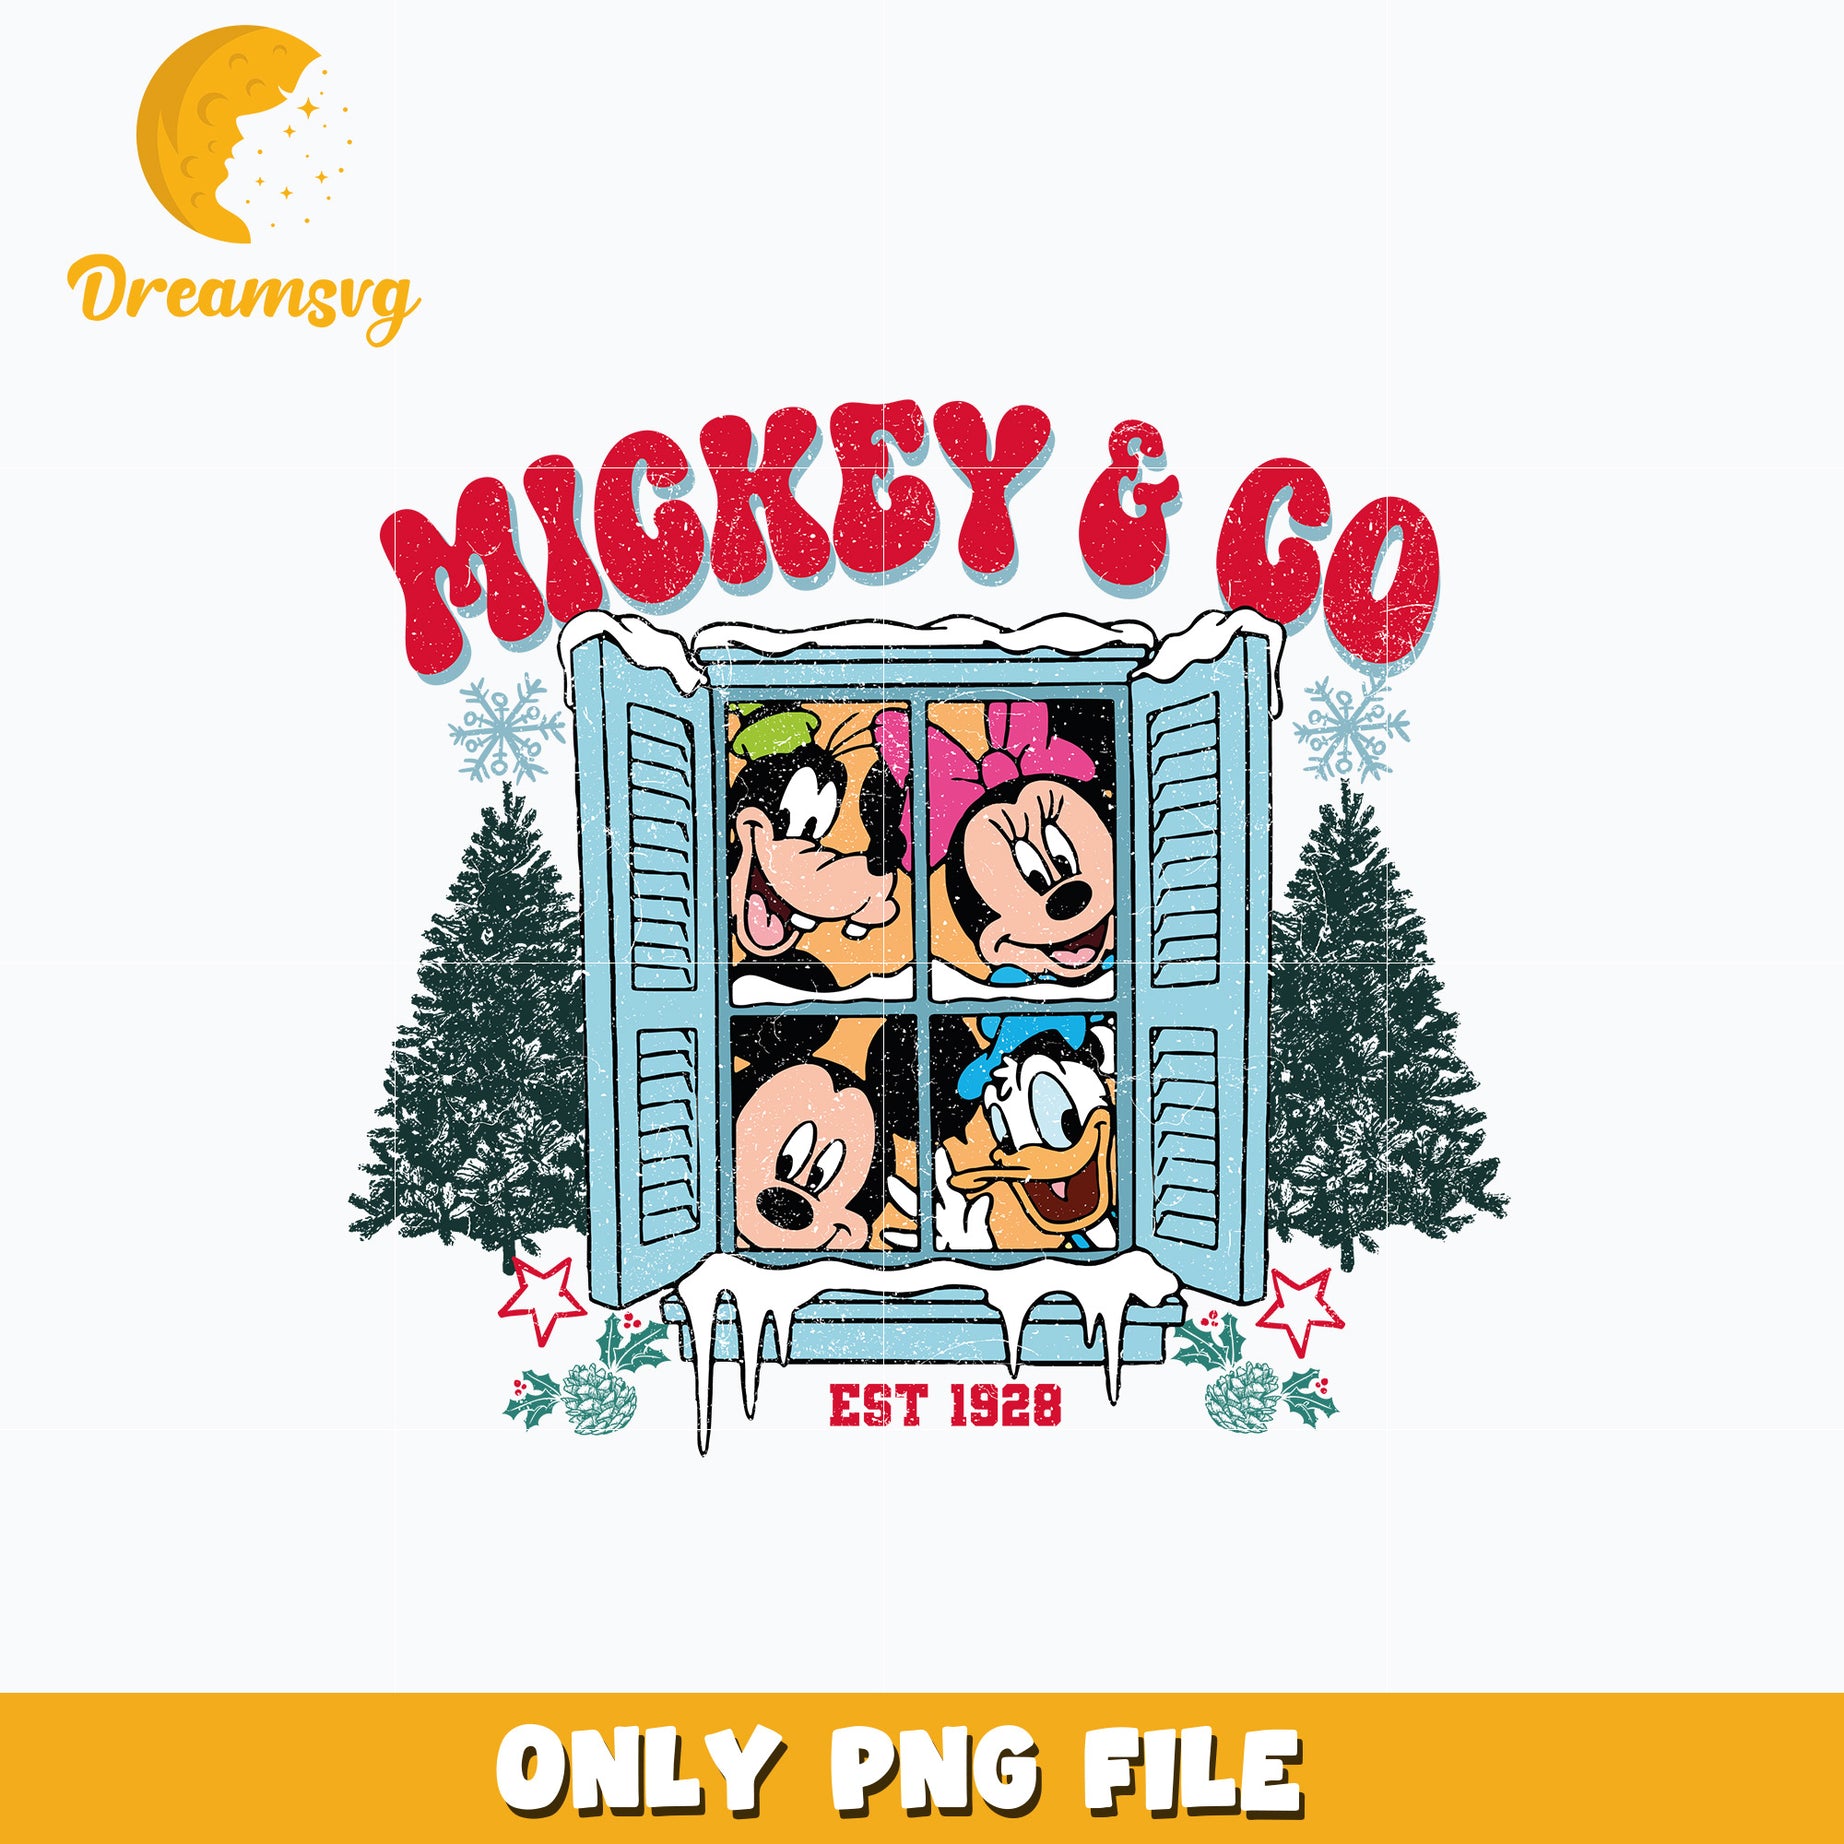 Mickey and co est 1928 png